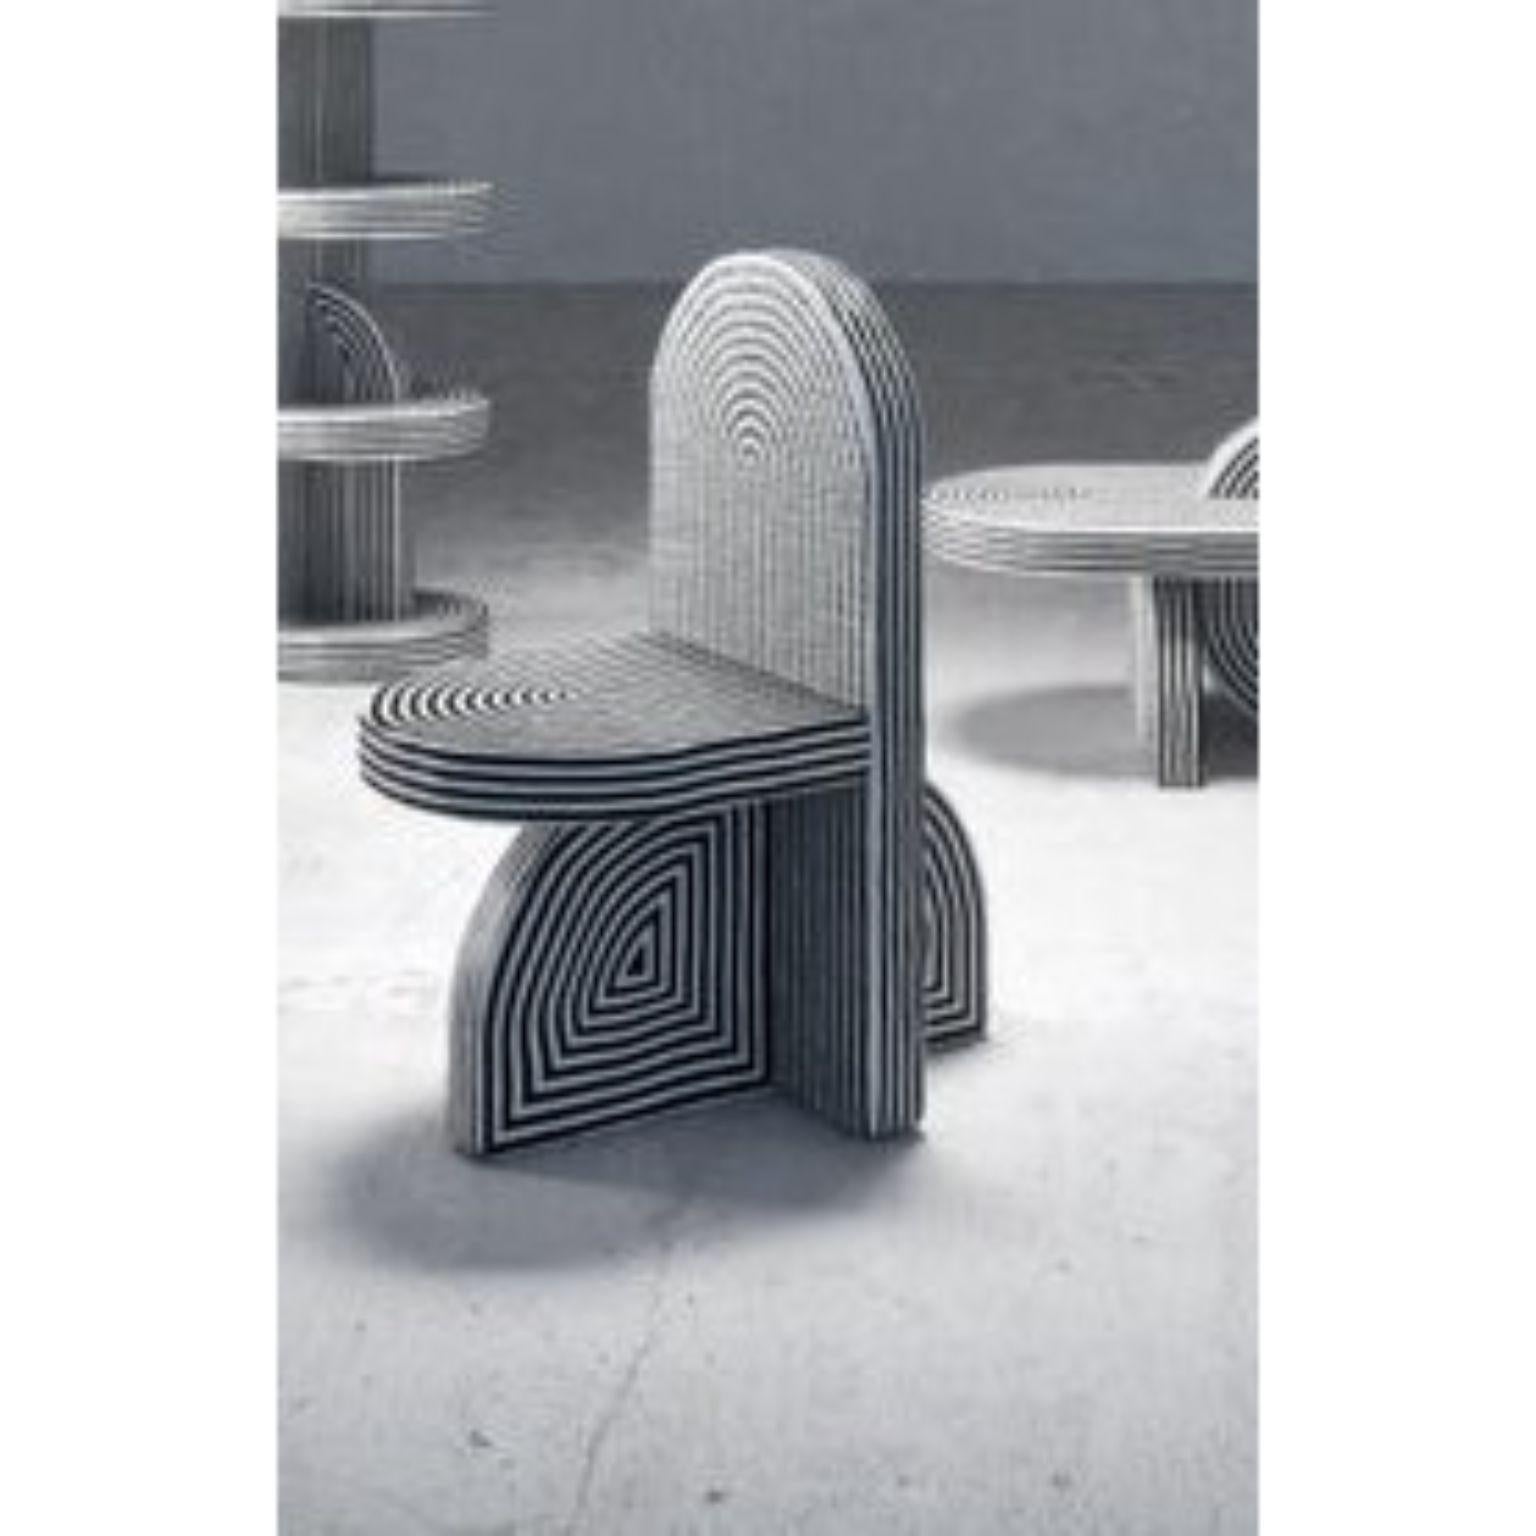 After Ago chair by Richard Yasmine
Materials: Foam, Lightweight concrete, plaster and acrylic
Dimensions: H 90 x W 45 x D 52cm/65cm
Seat height 45 cm
Seat depth 45cm 
Seat width 45 cm
Total depth on floor 75 cm

AFTER AGO is an ode to an arch, a